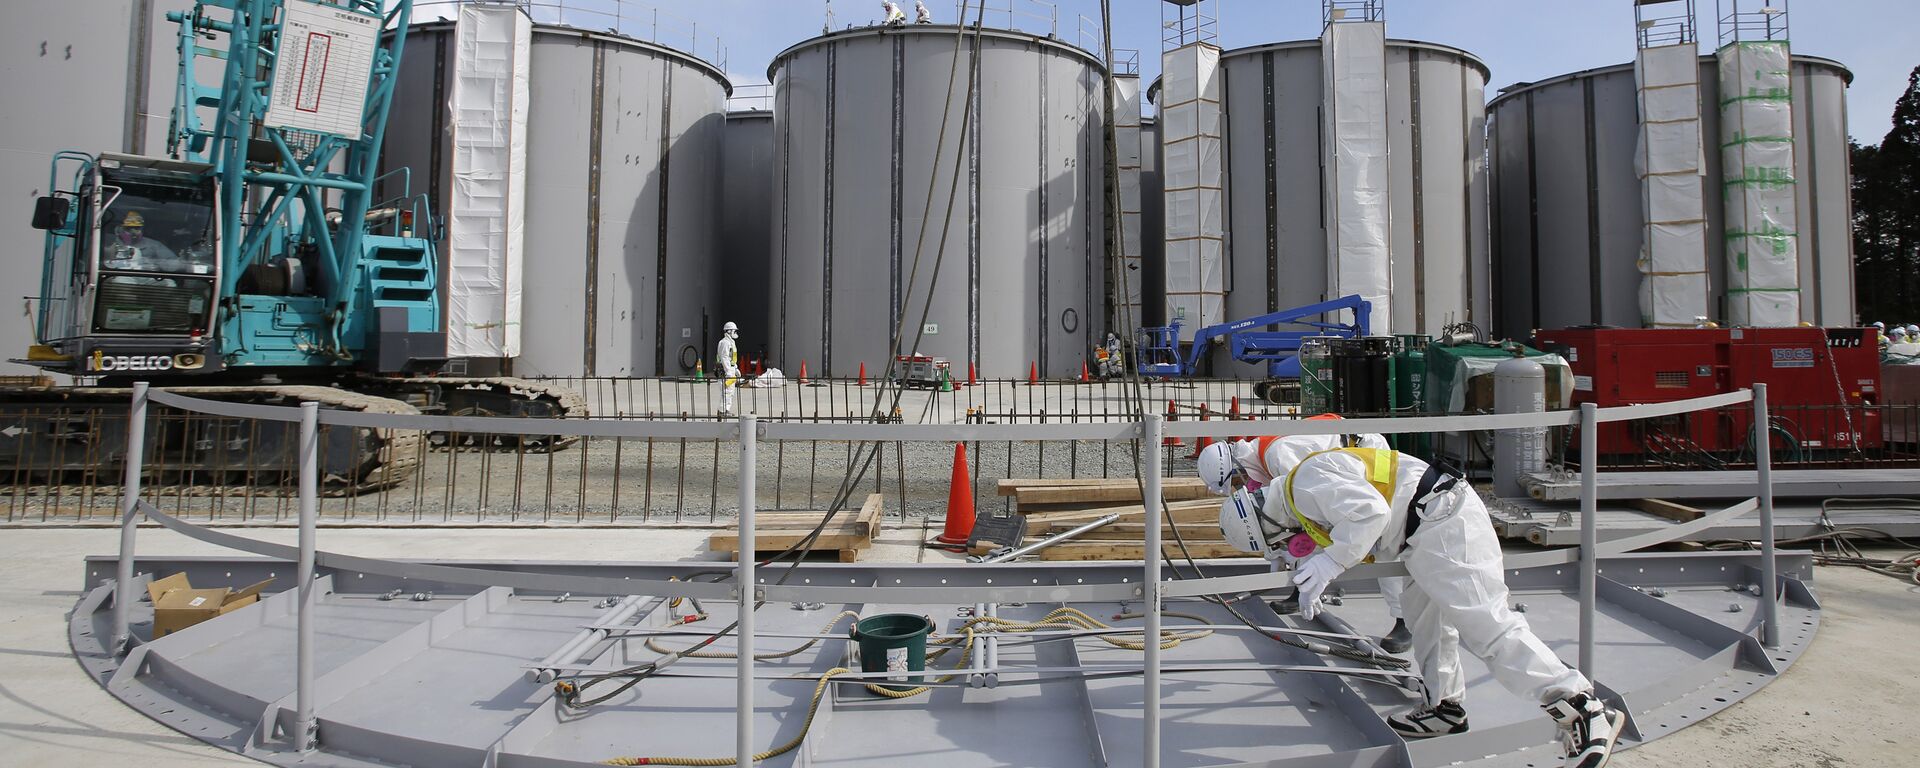 Men wearing protective suits and masks work in front of welding storage tanks for radioactive water, under construction in the J1 area at the Tokyo Electric Power Co's (TEPCO) tsunami-crippled Fukushima Daiichi nuclear power plant in Okuma in Fukushima prefecture. (File) - Sputnik International, 1920, 13.04.2021